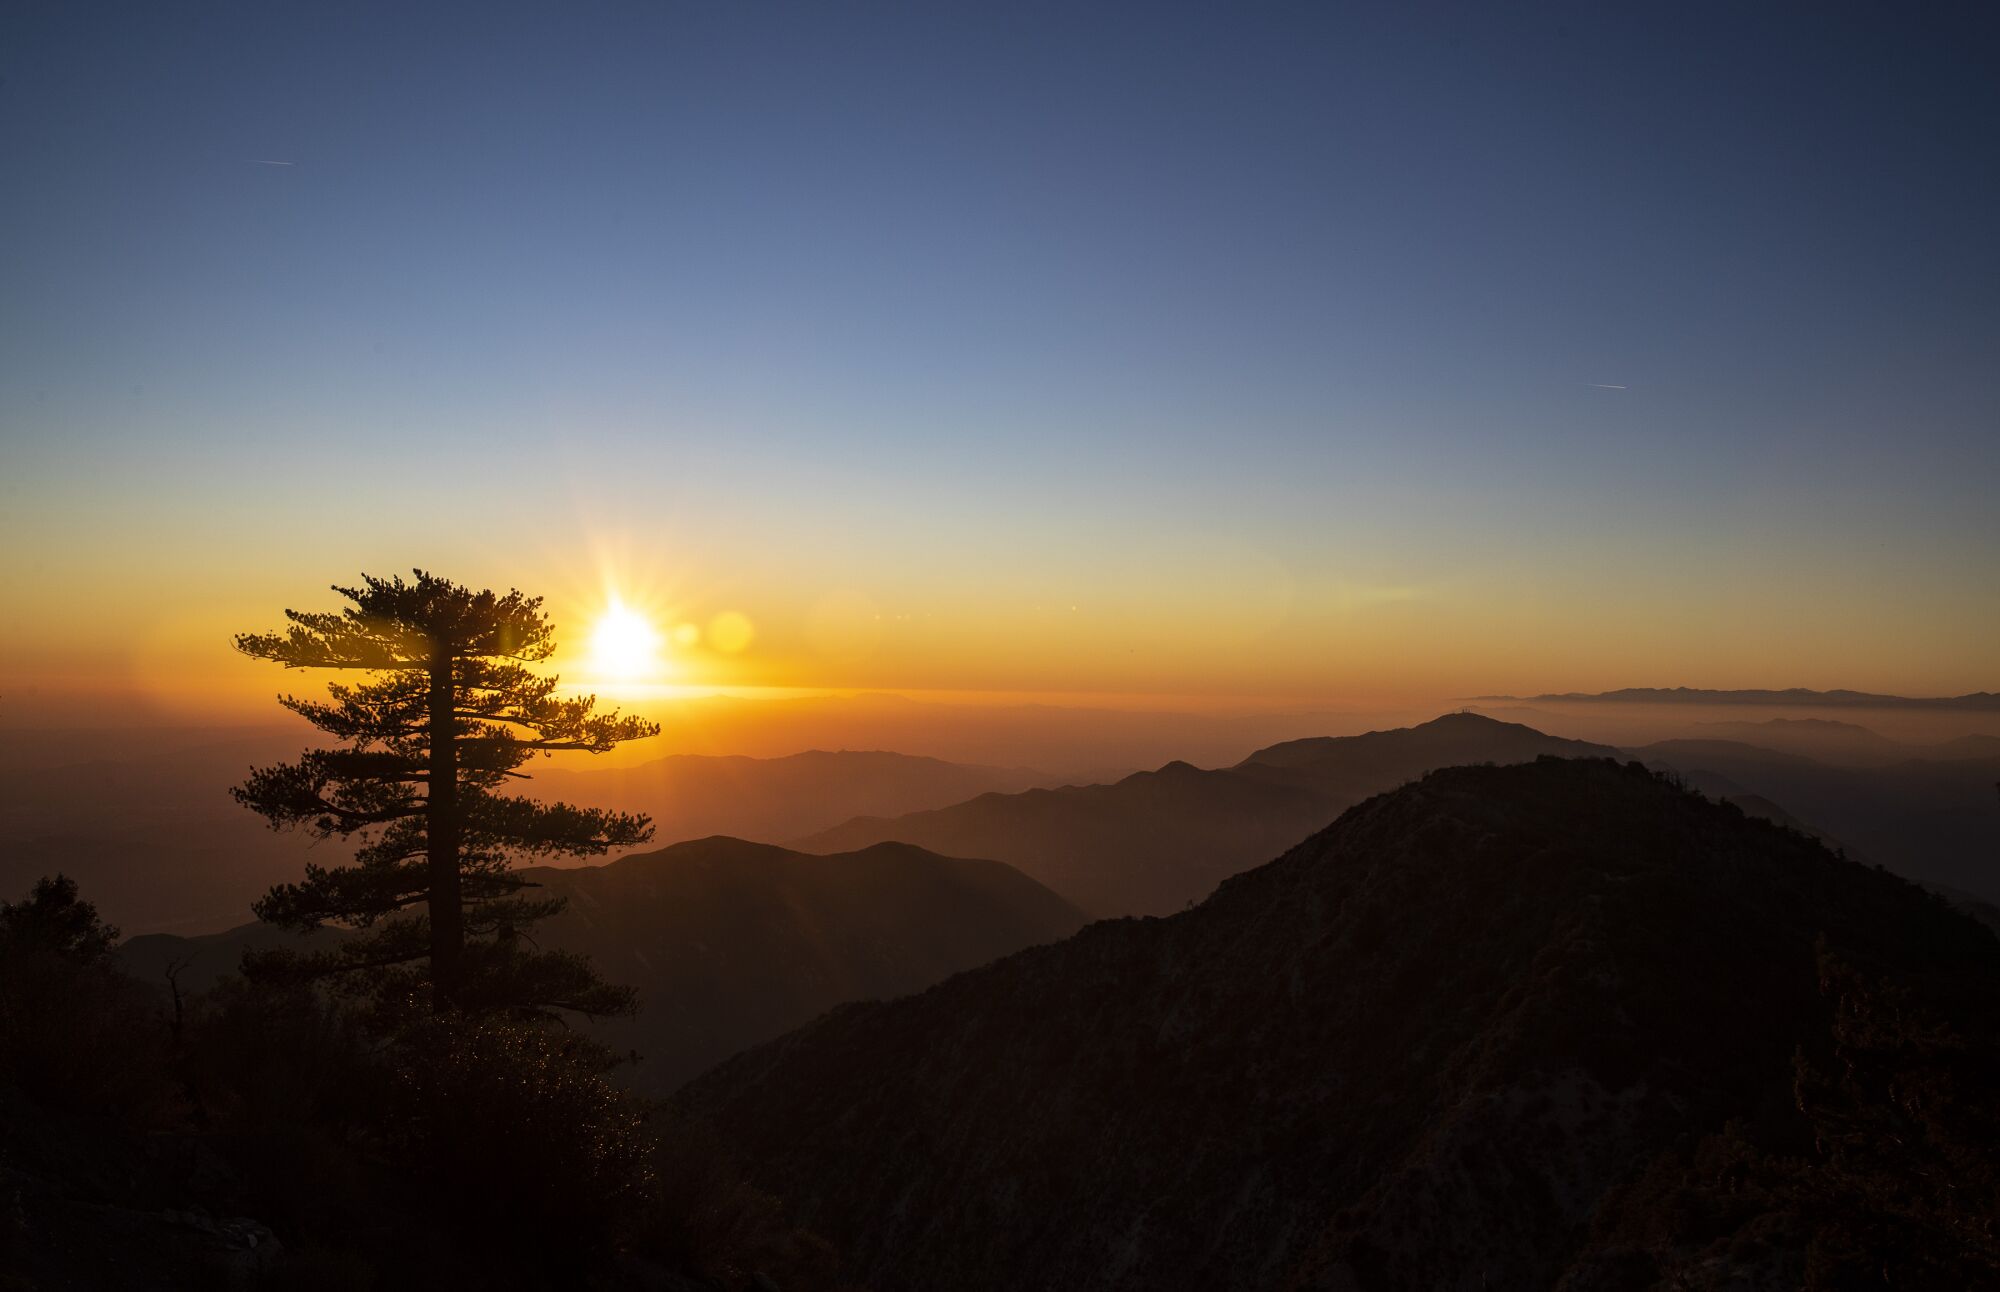 A sunset view from atop Mt. Disappointment in the San Gabriel Mountains on Feb. 6.